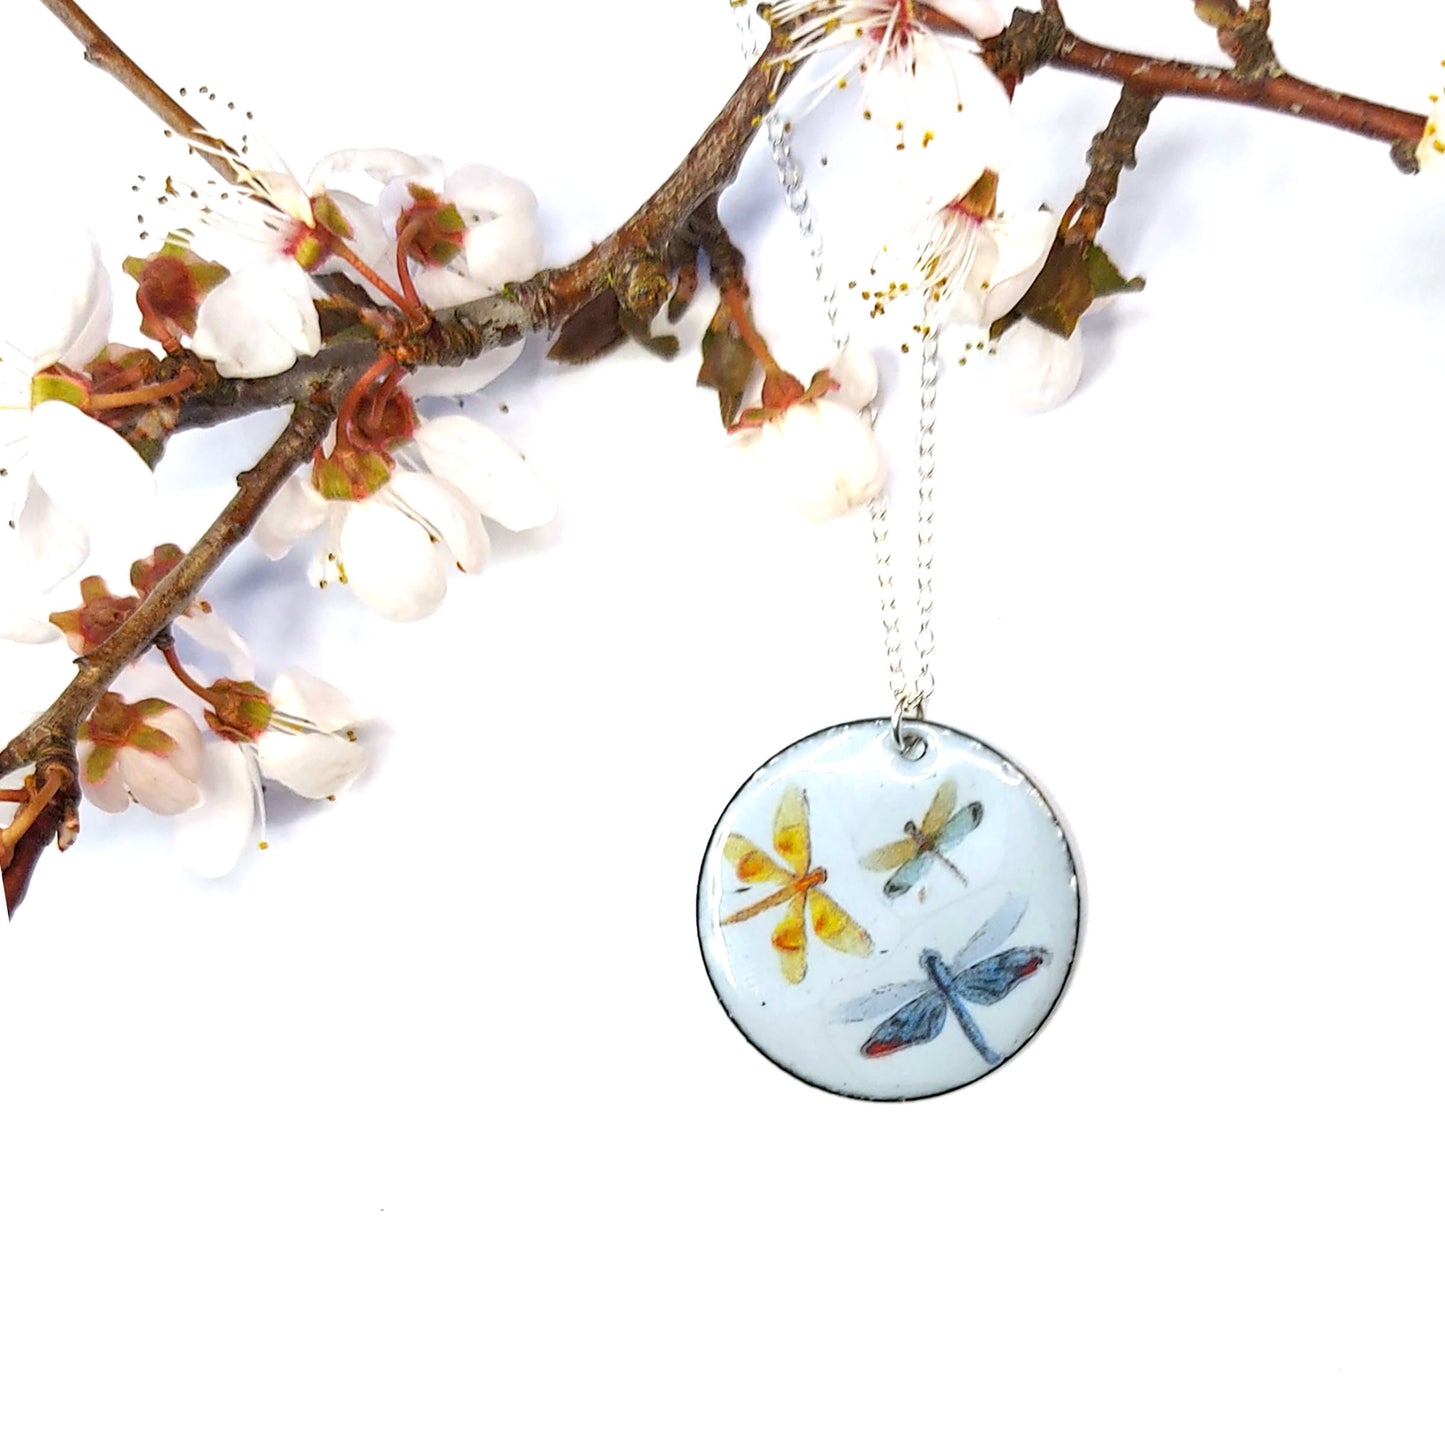 A round enamel pendant hangs from a silver chain. The pendant has a light grey background and 3 dragonflies on it - with branch